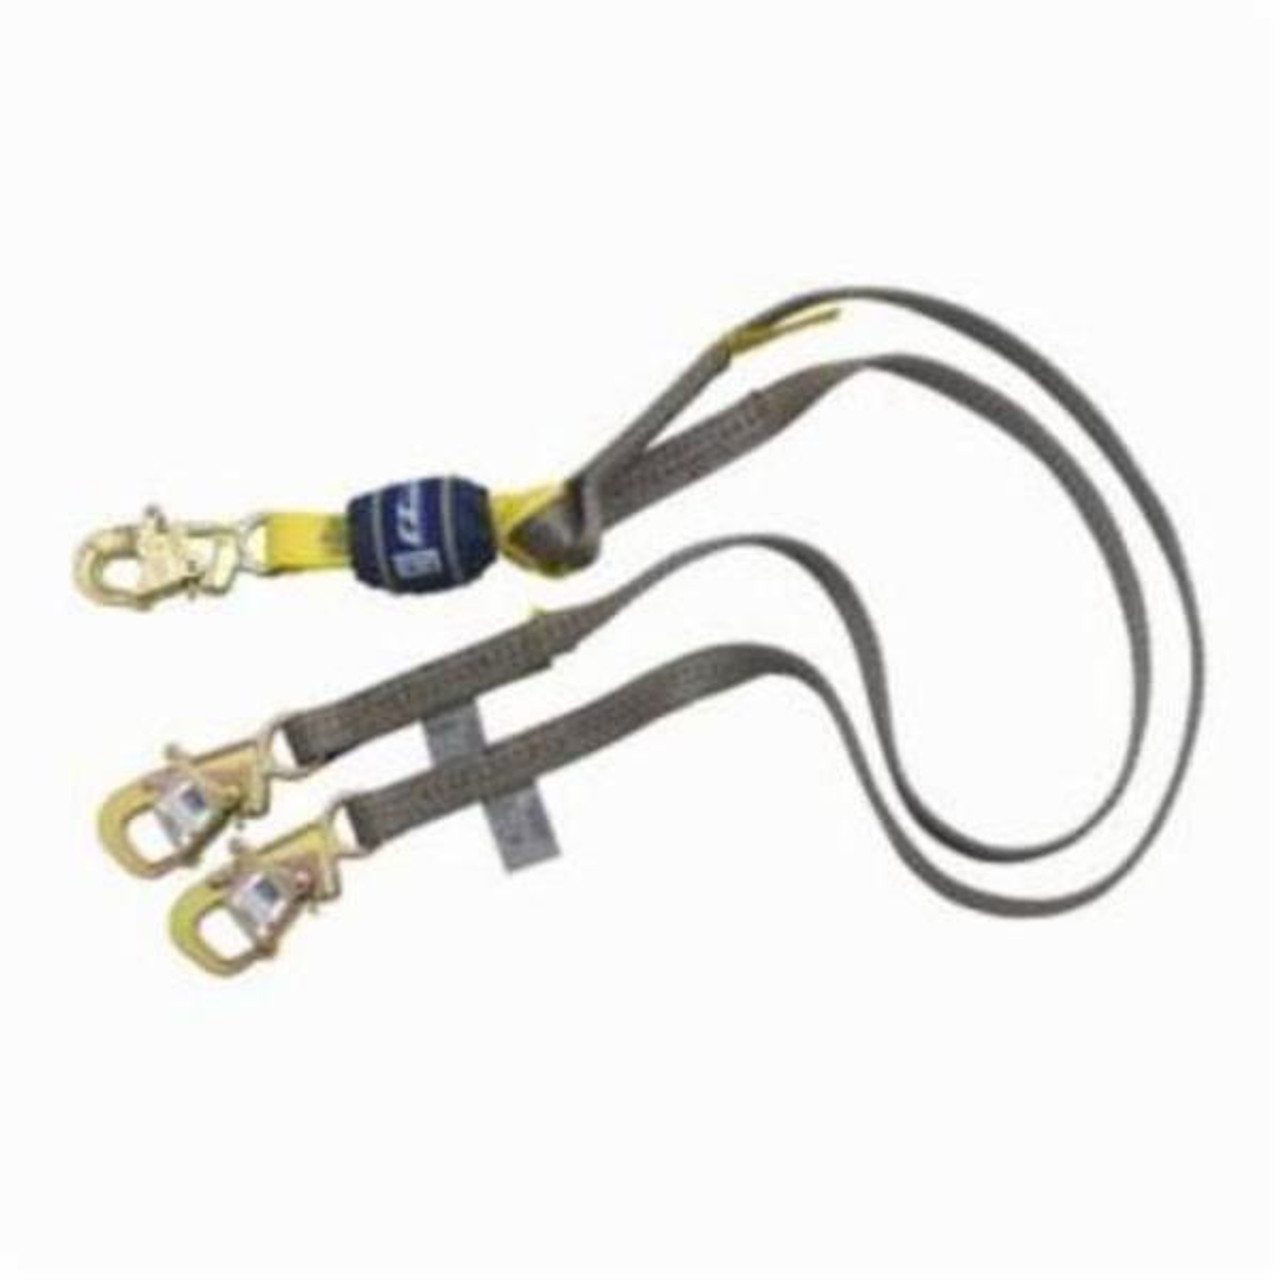 Safety Single Leg Tie-Back Lanyard with Snap hooks both ends